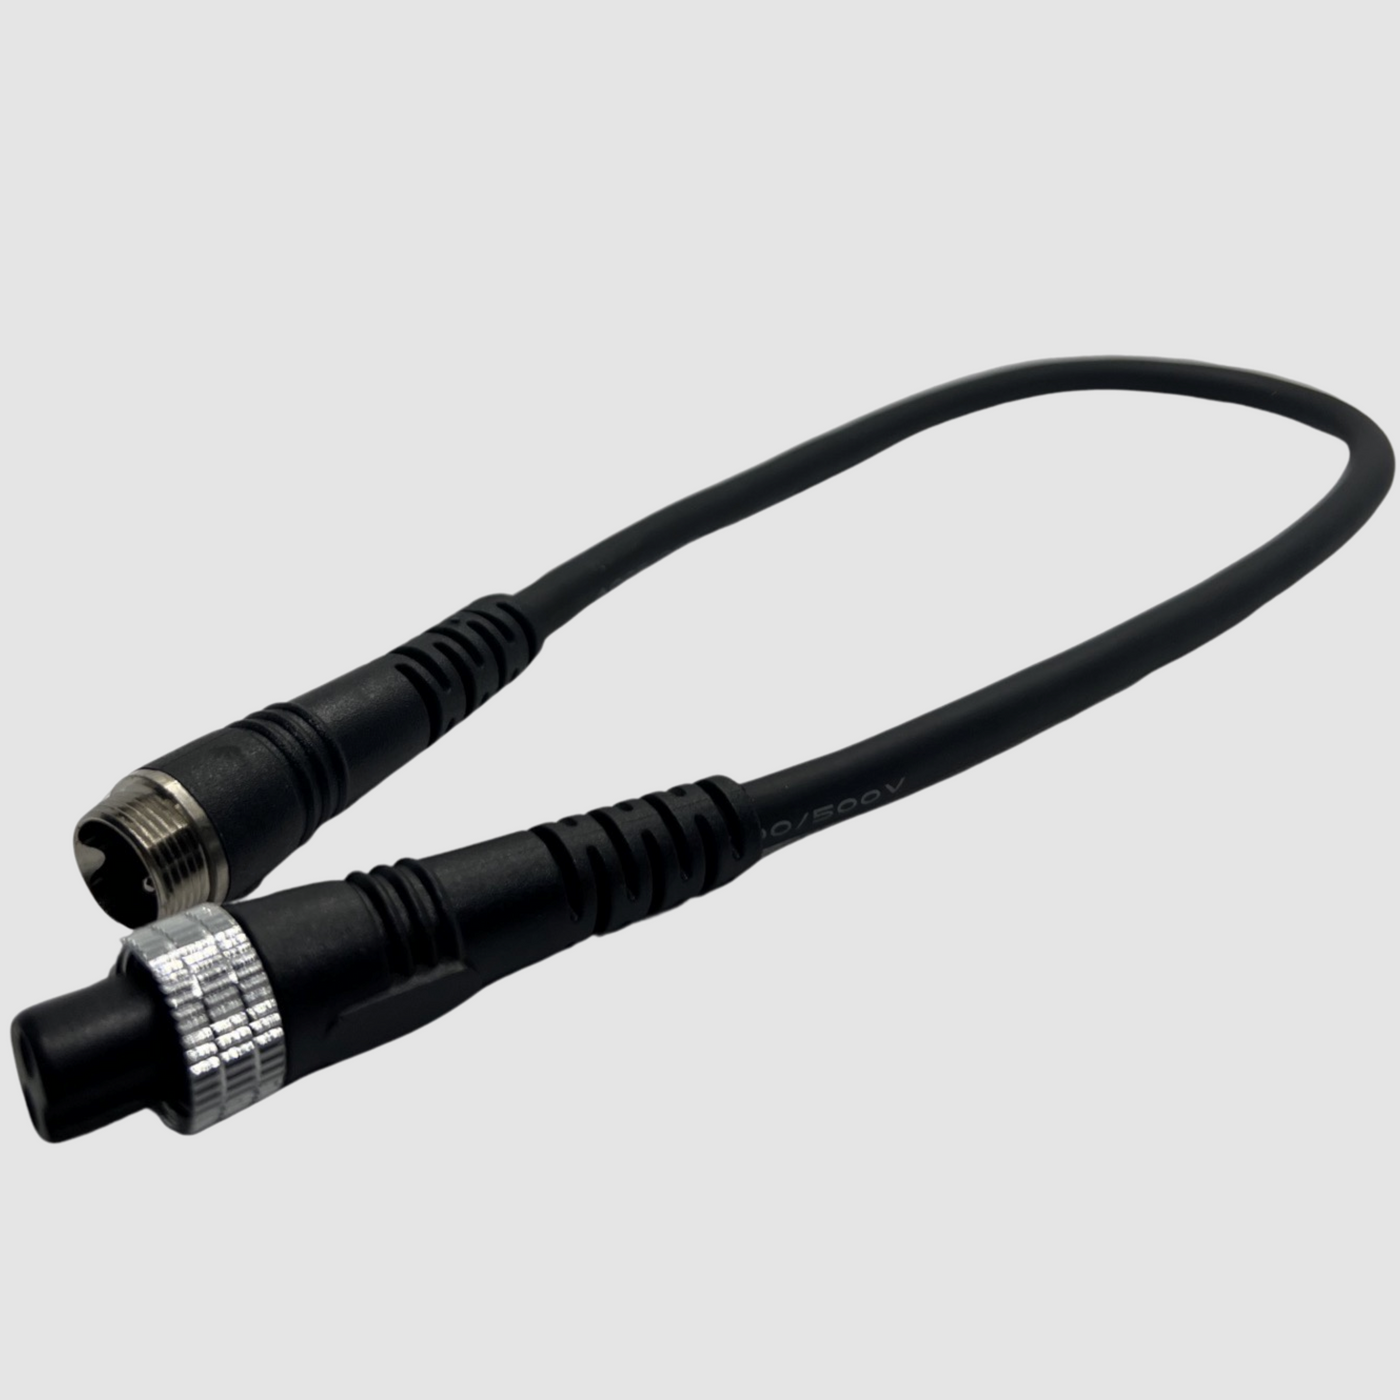 Standard Banax Adapter Cable